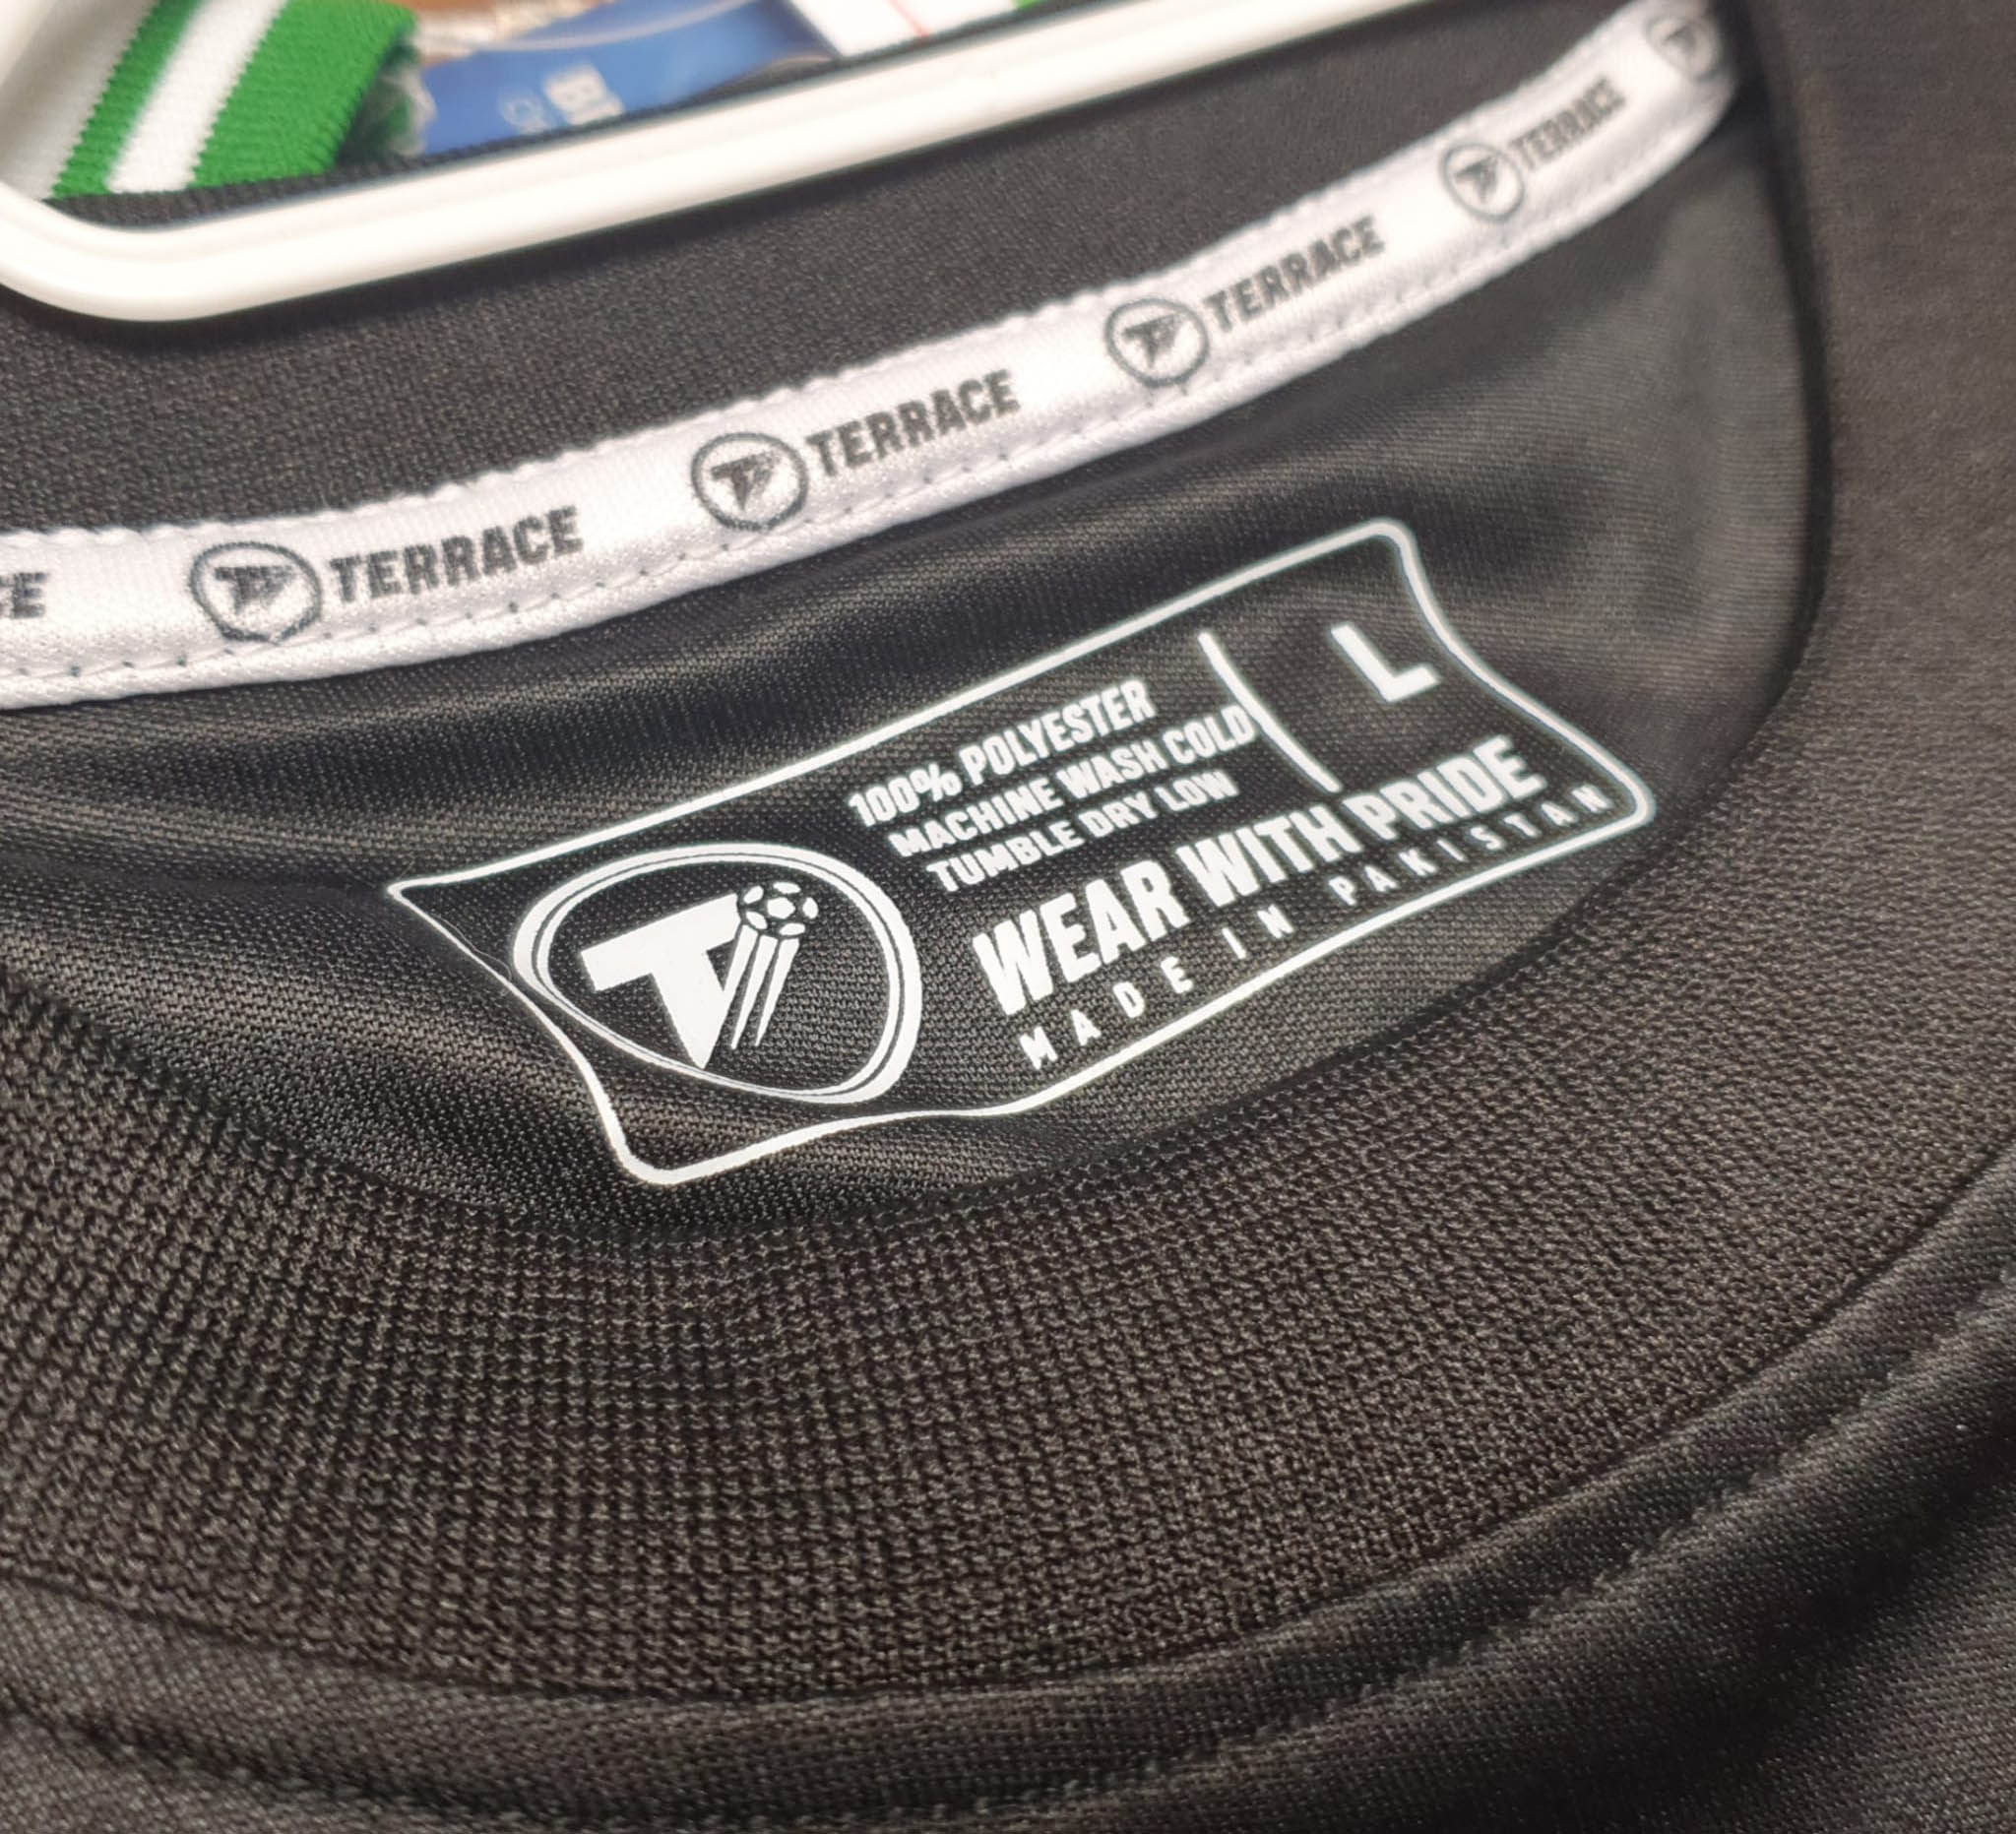 A close-up shows The Terrace logo printed inside a T-shirt collar.